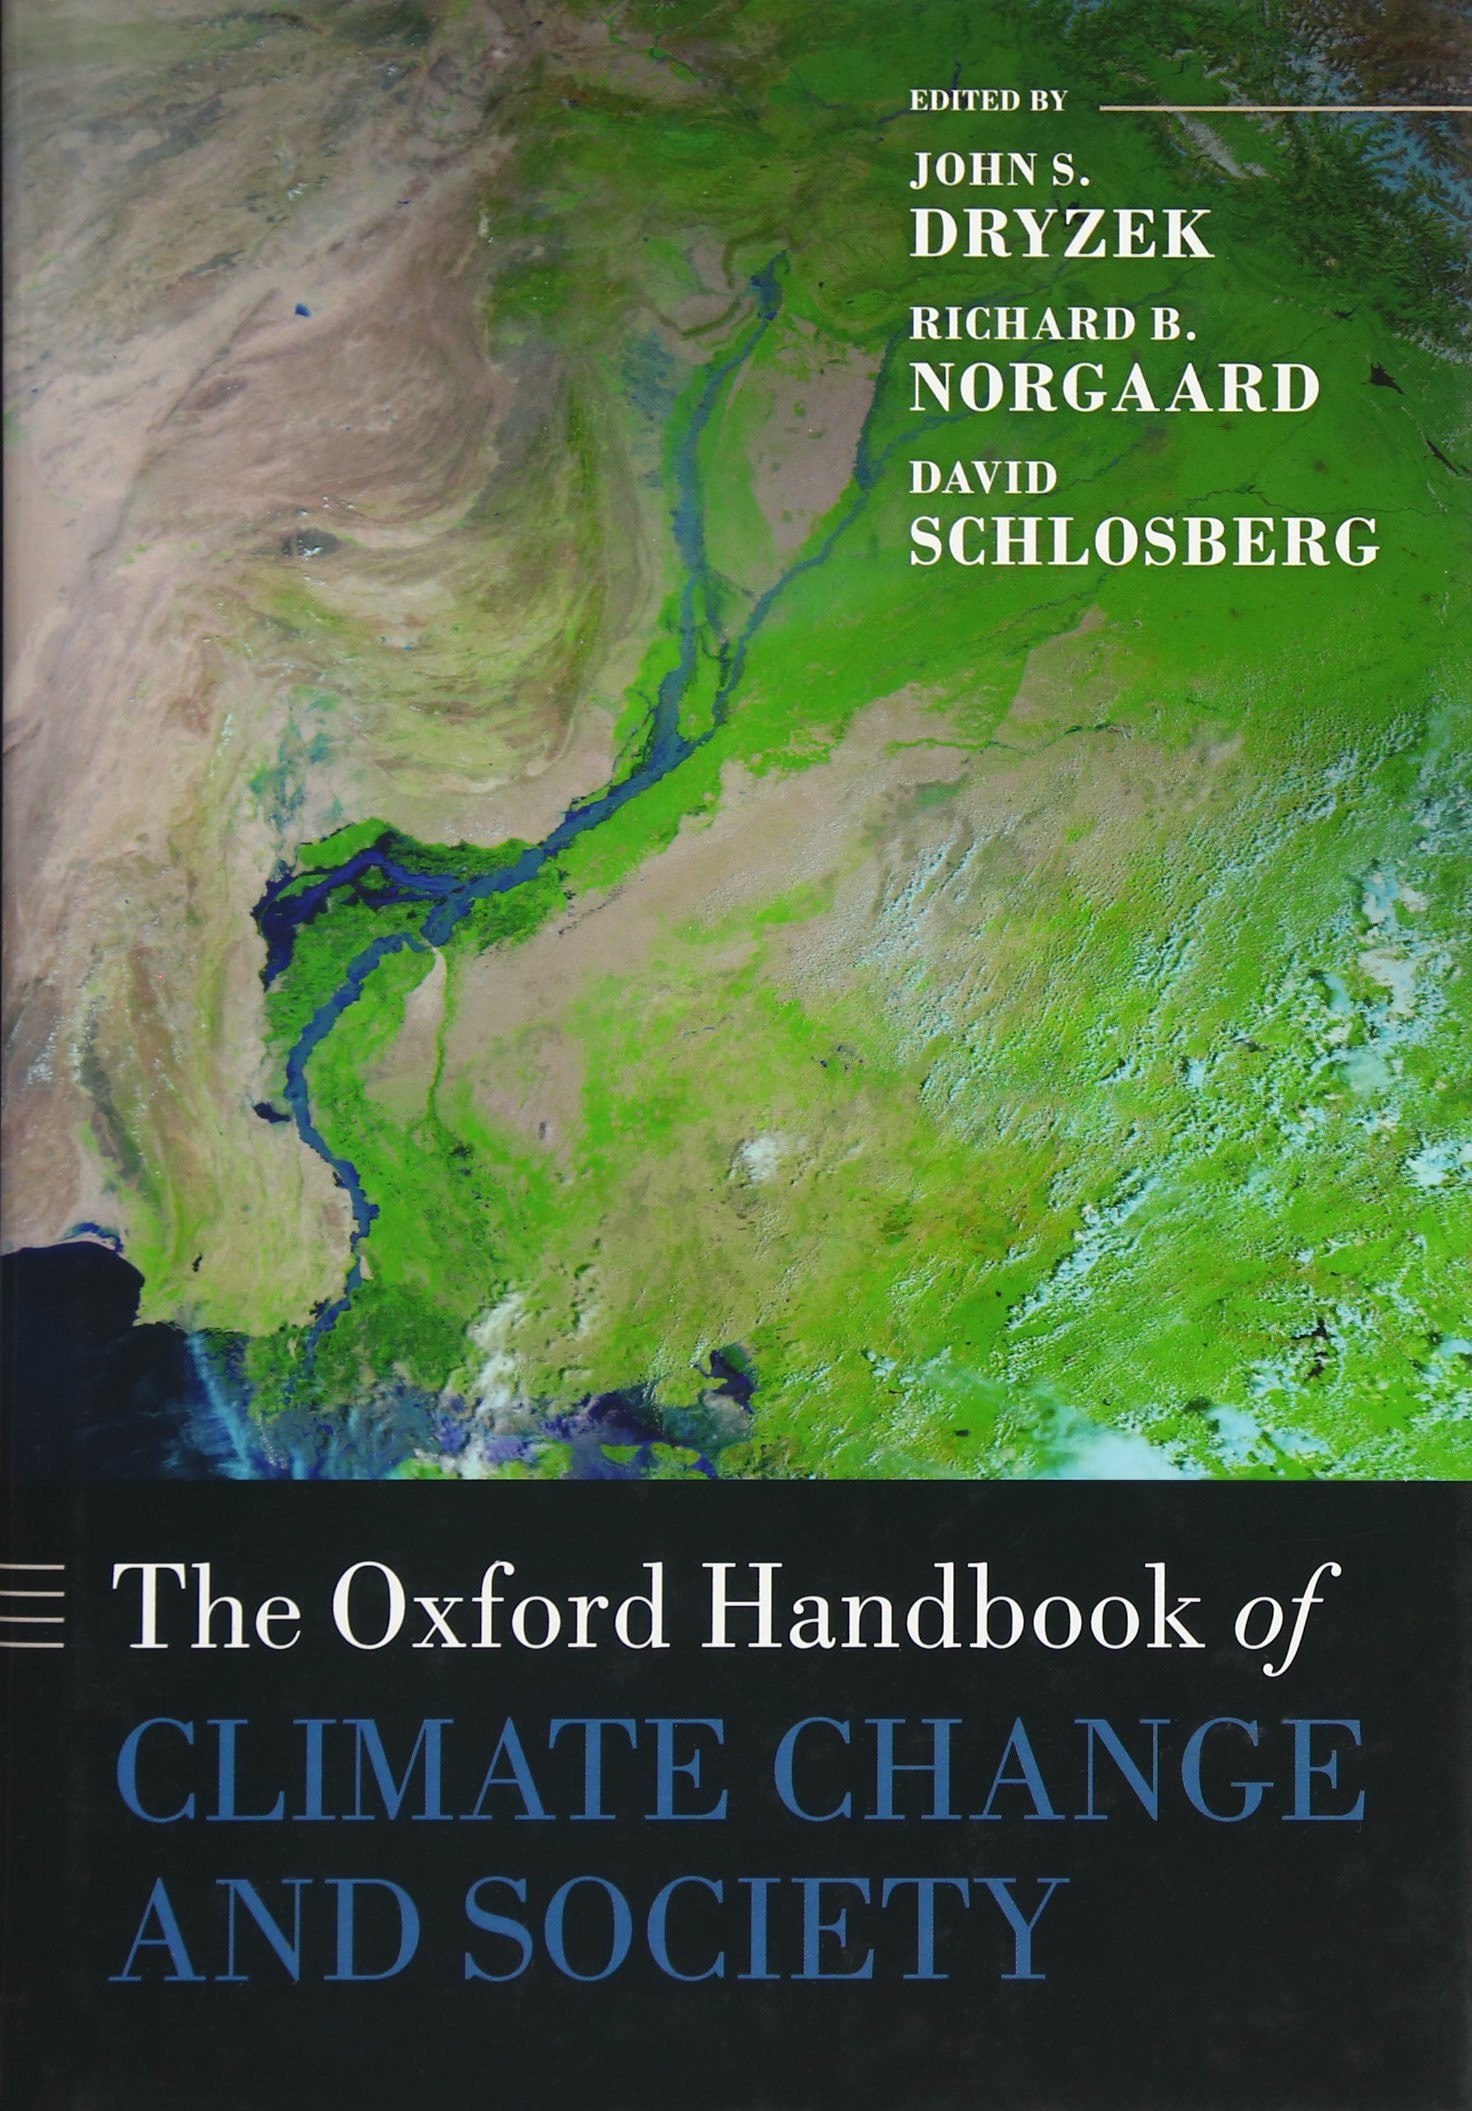 The Oxford Handbook of Climate Change and Society